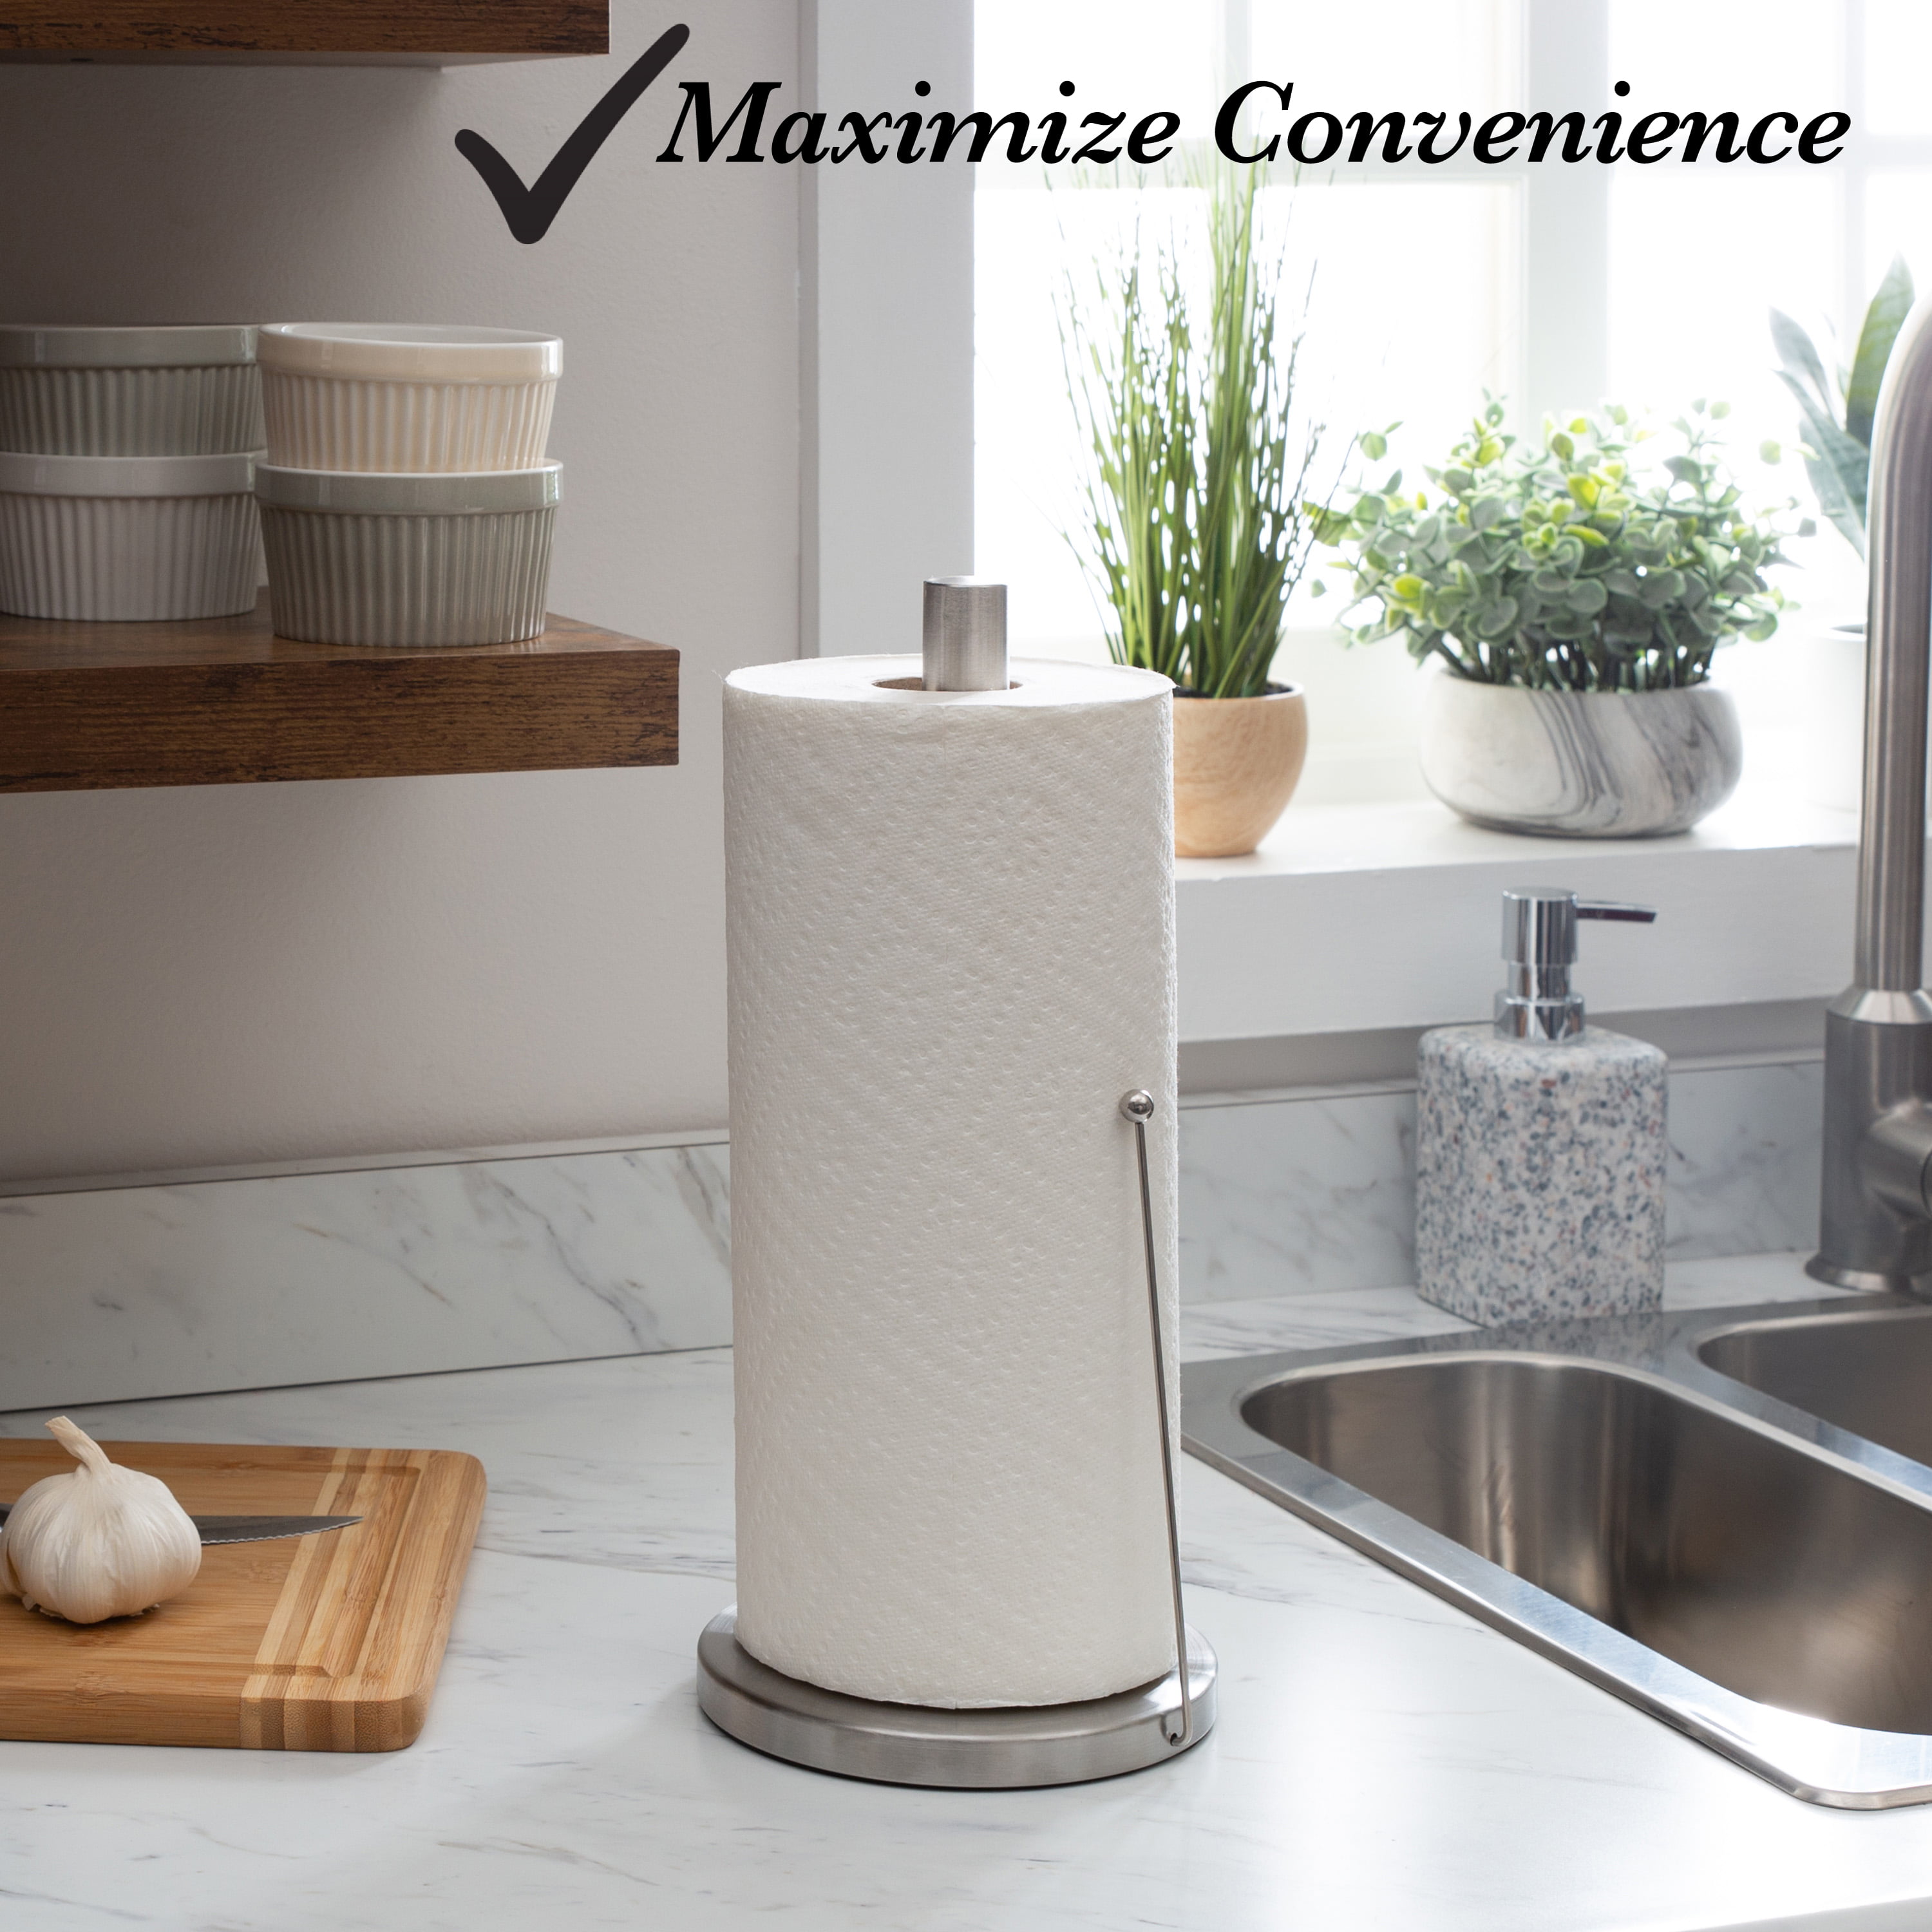 DELITON Magnetic Paper Towel Holder - Magnetic Paper Towel Holder for  Refrigerator Strong Magnet Paper Towel Bar for Kitchen RV BBQ Stainless  Steel